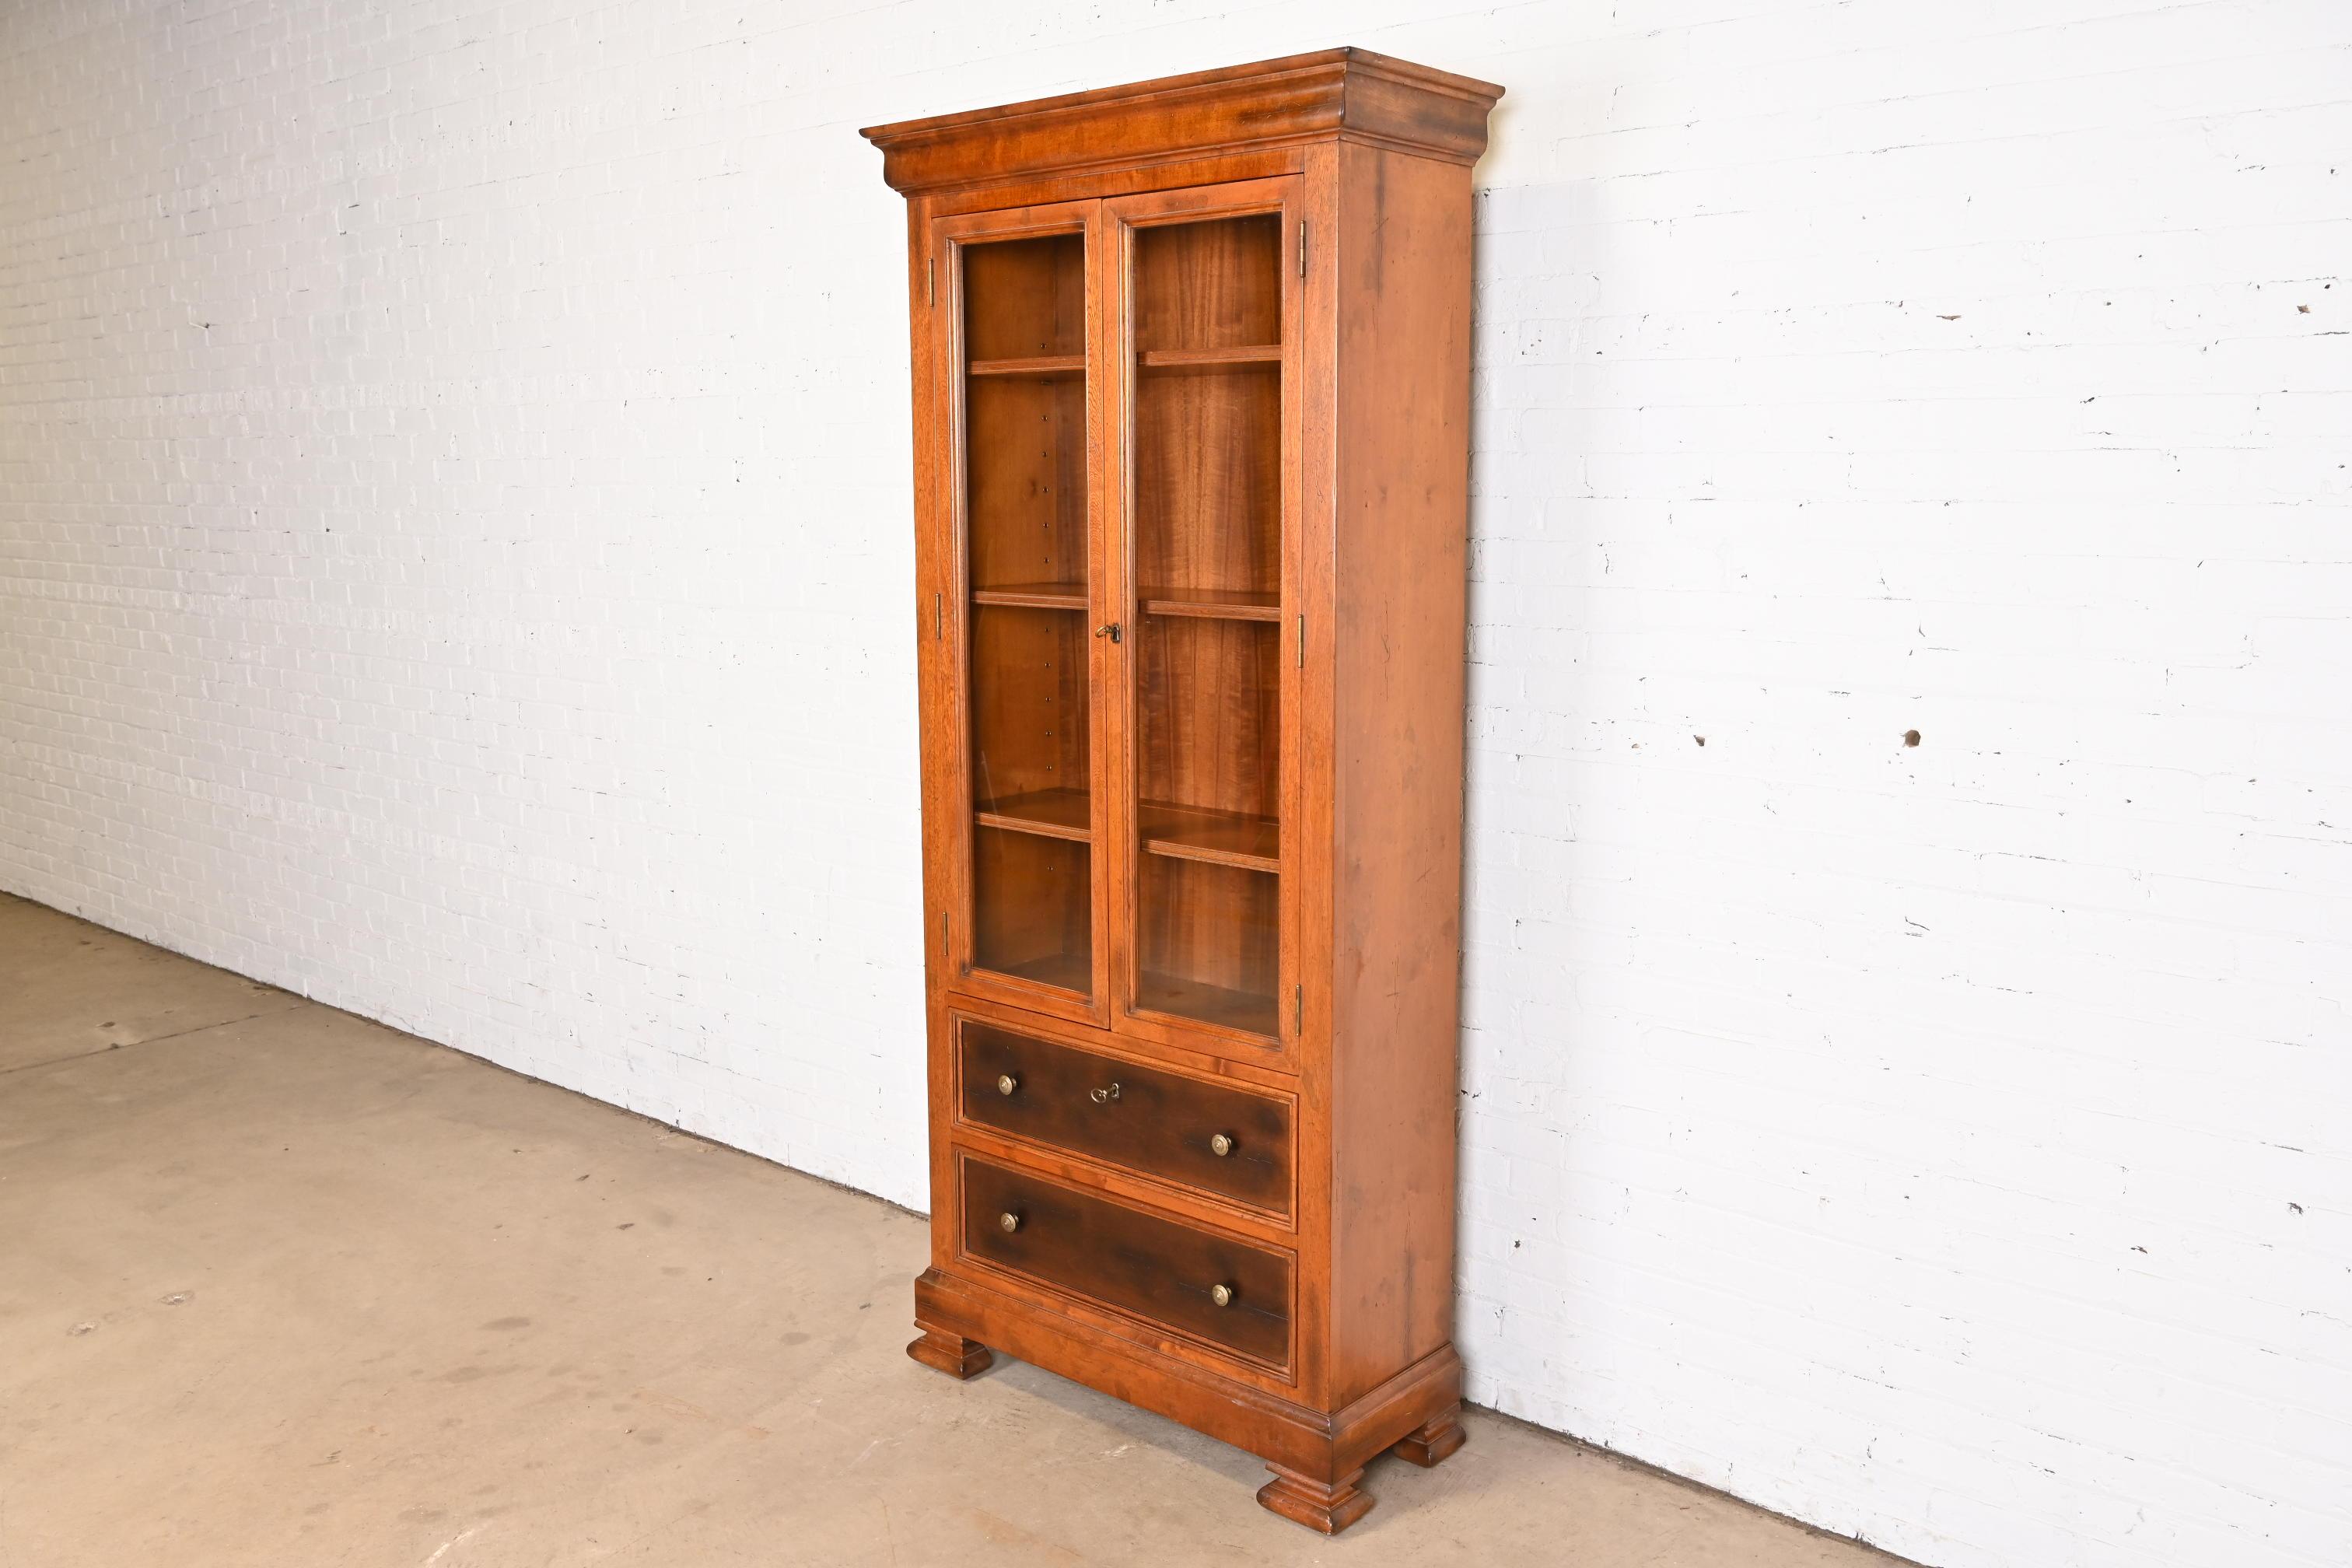 Baker Furniture Italian Provincial Maple Bibliotheque Bookcase Cabinet In Good Condition For Sale In South Bend, IN